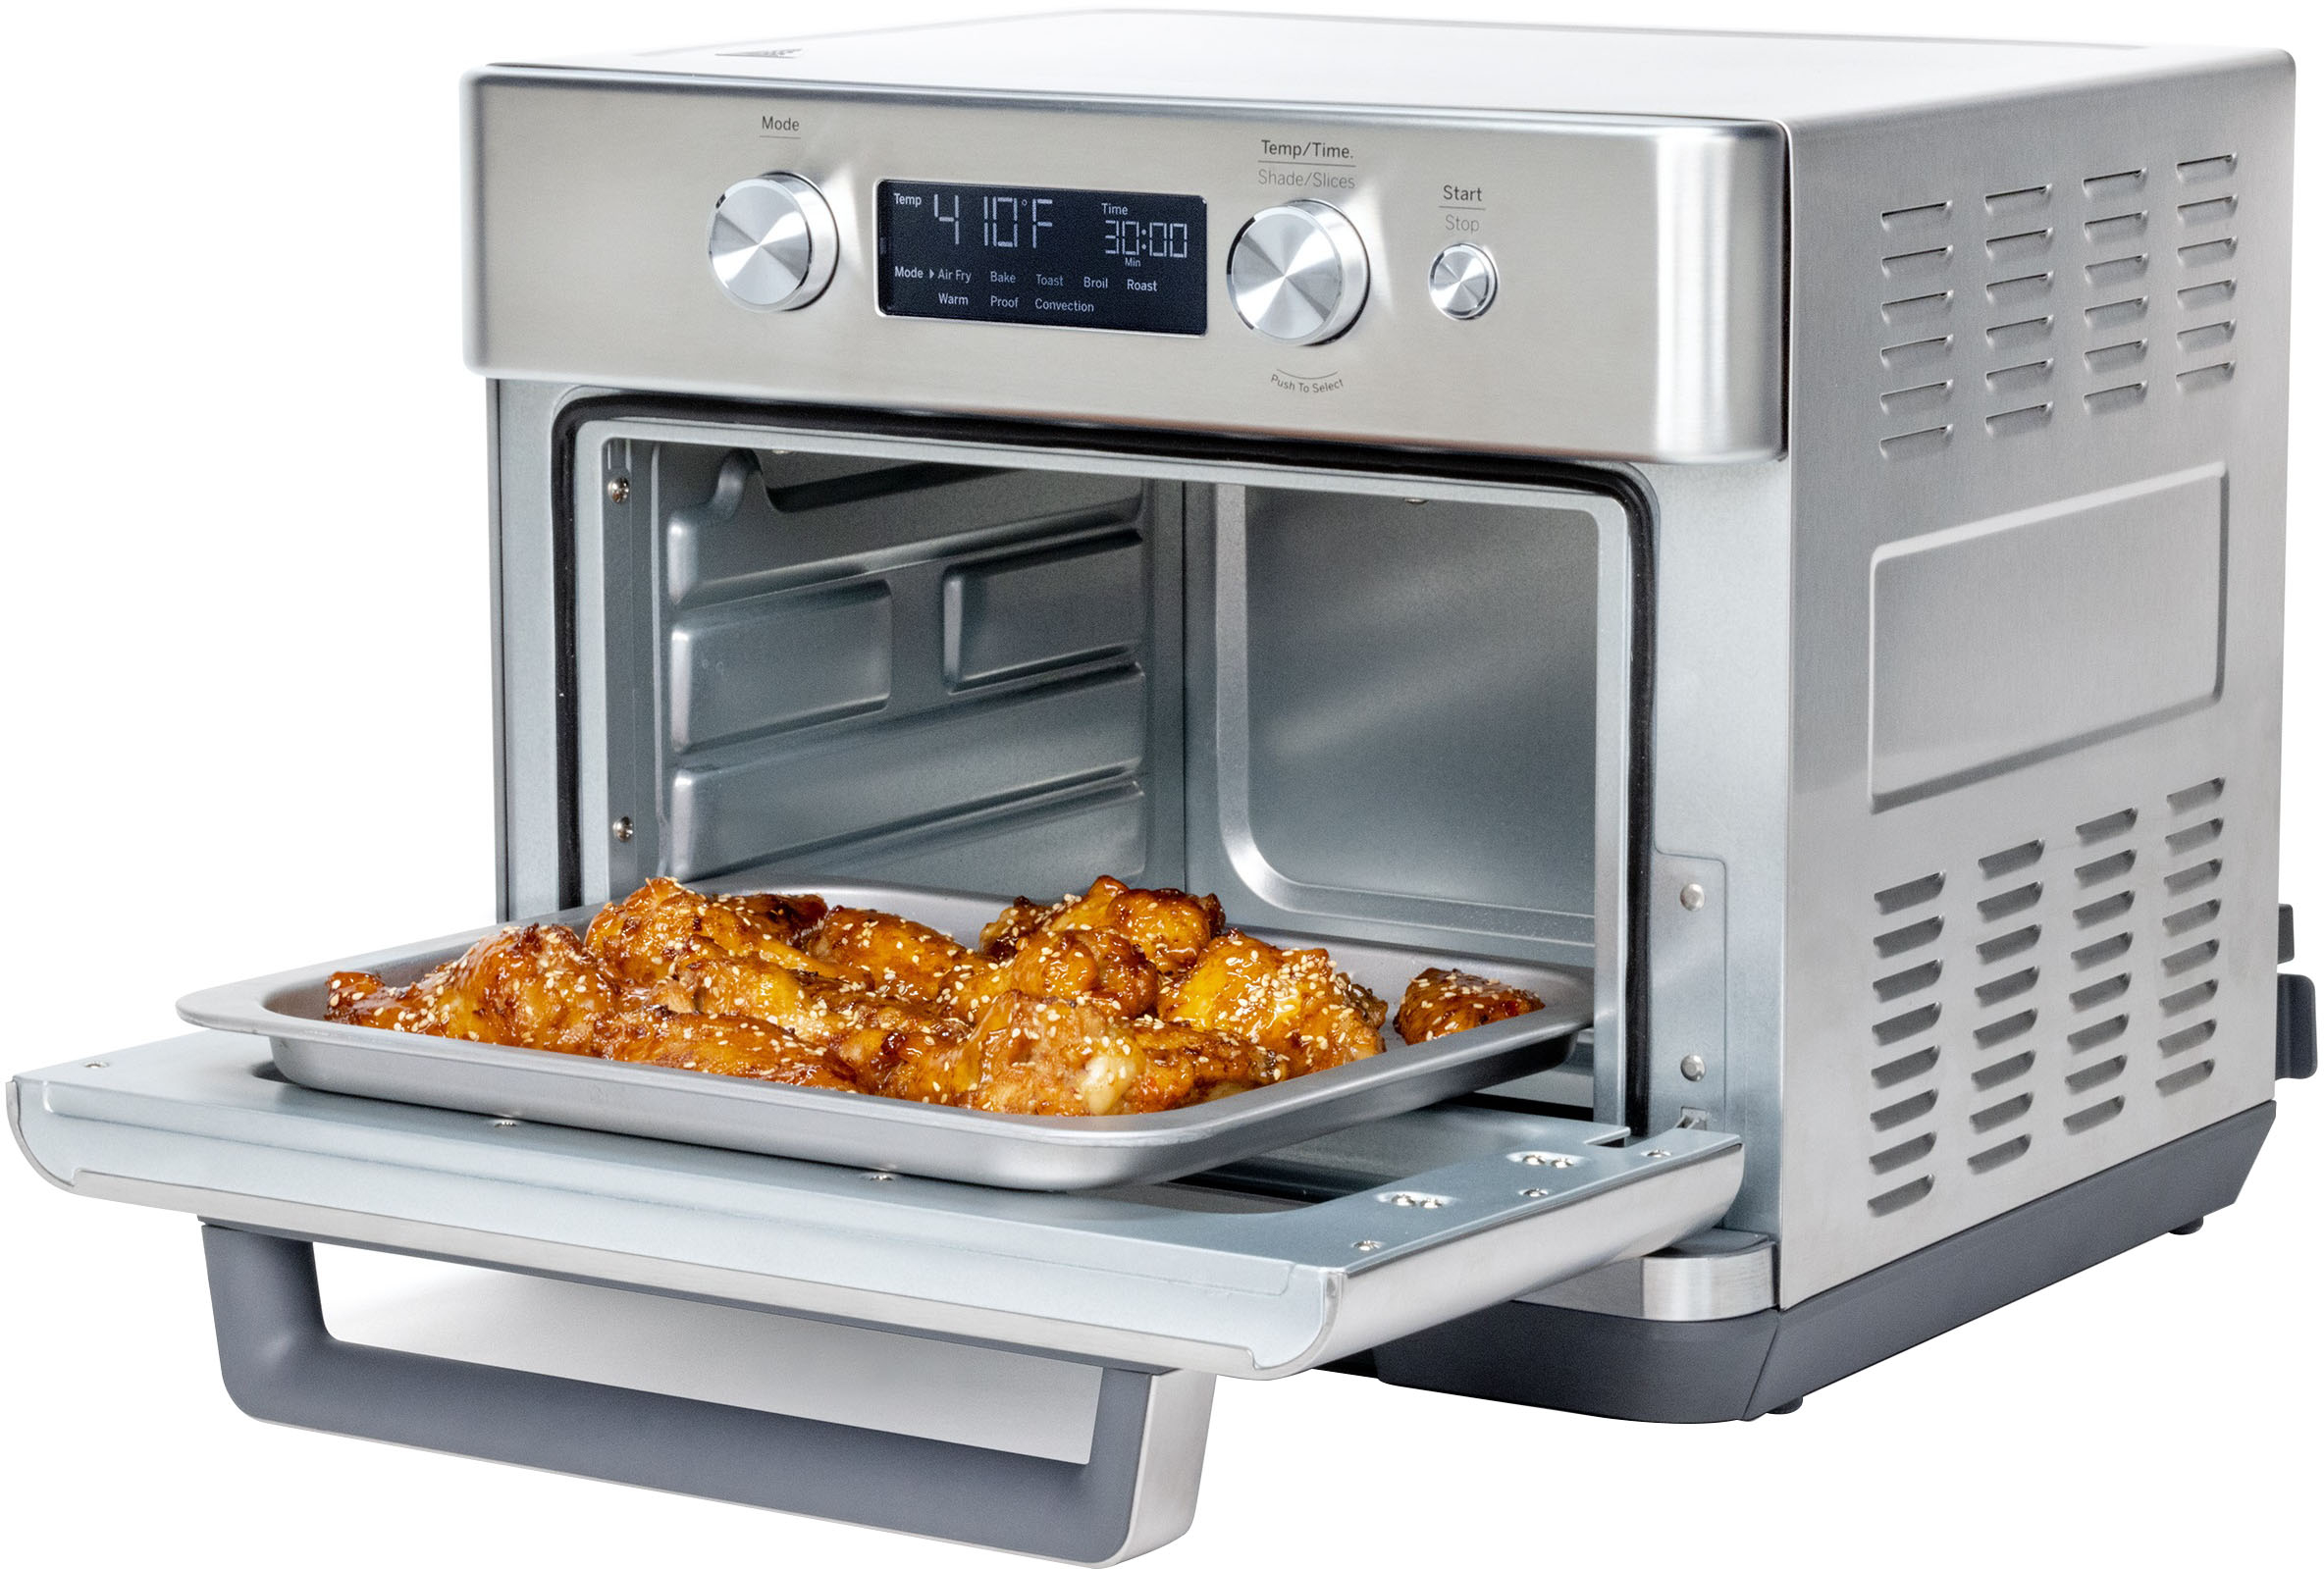 Air Fryer Toaster Oven Combo, WEESTA Convection Oven Countertop, Large –  ChinotiFurniture